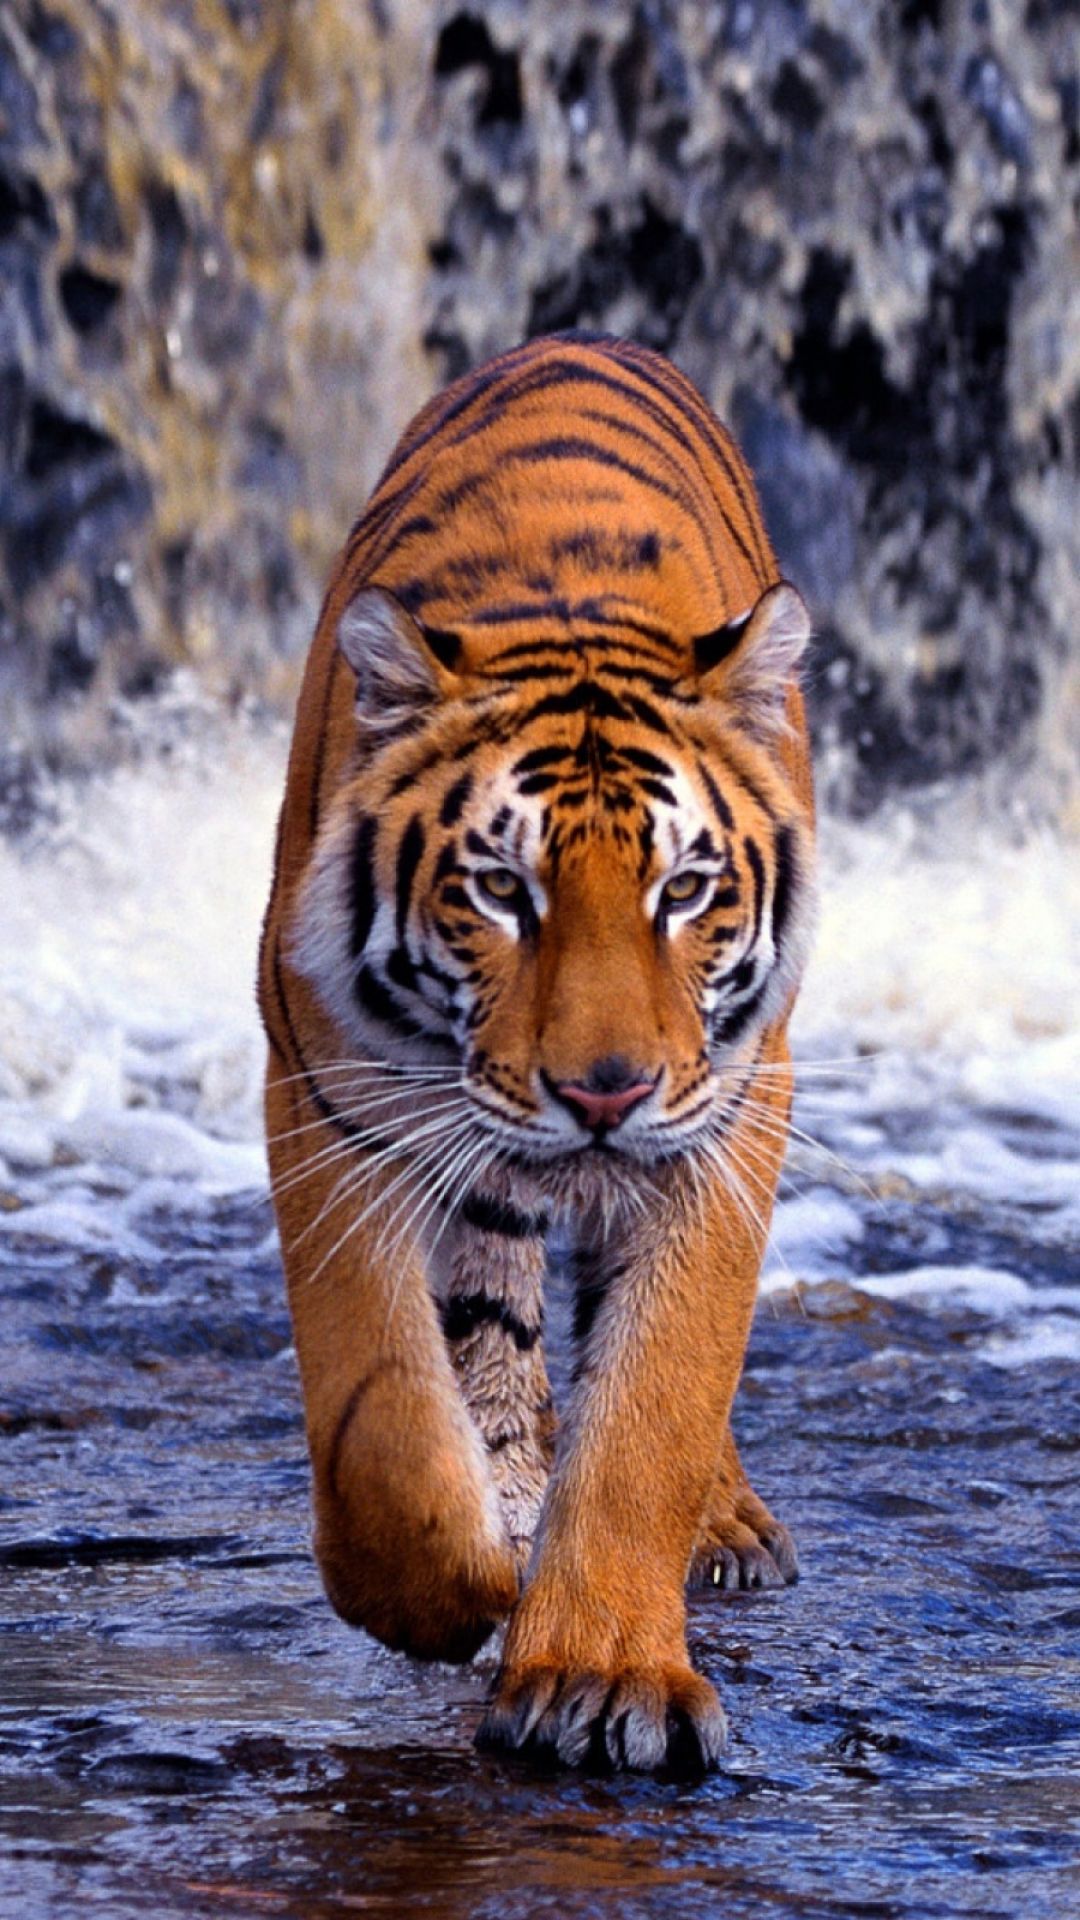 ✓[45+] Tiger Mobile Wallpaper - Android / iPhone HD Wallpaper Background  Download (png / jpg) (2023)